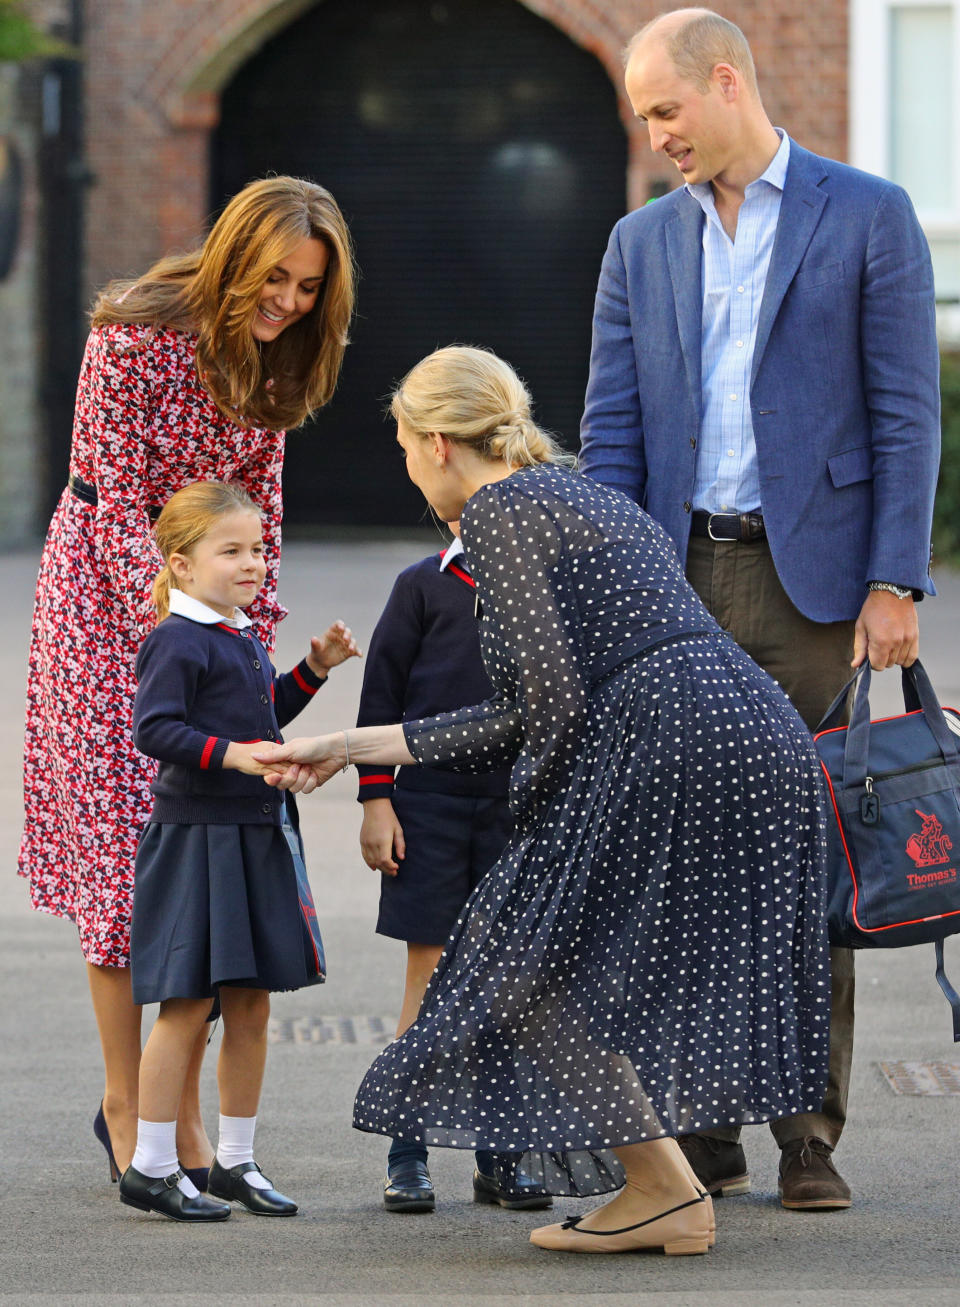 Helen Haslem, head of the lower school, greets Princess Charlotte as she arrives for her first day of school, with her brother Prince George and her parents the Duke and Duchess of Cambridge, at Thomas's Battersea in London on Sept. 5, 2019. (Photo: WPA Pool via Getty Images)